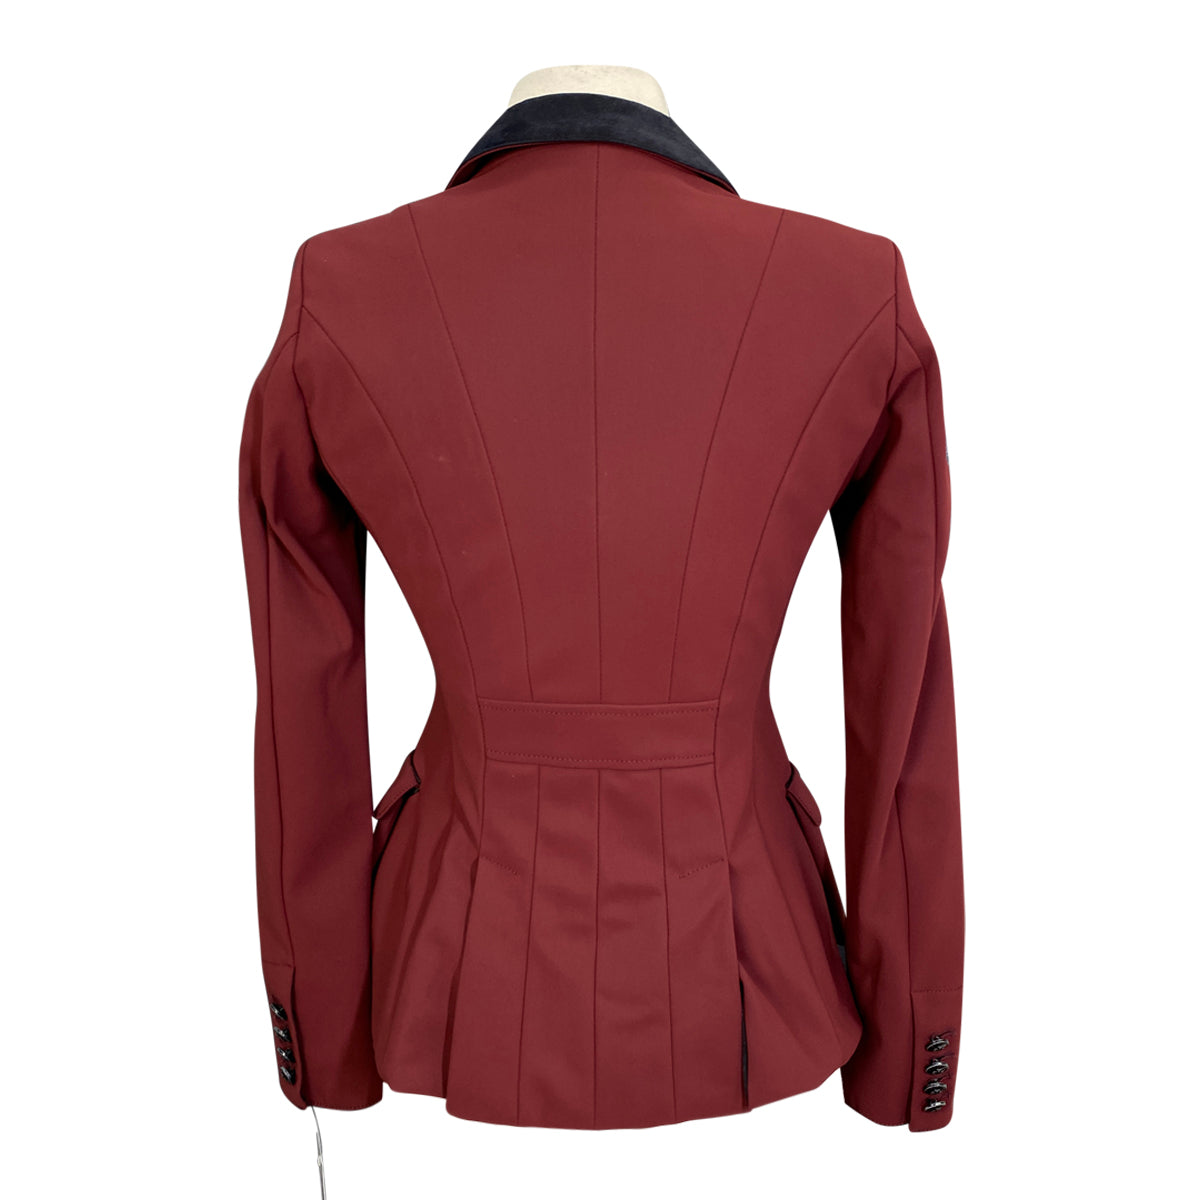 Cavalleria Toscana Competition Jacket in Burgundy/Black - Women&#39;s IT 38 (US 4)